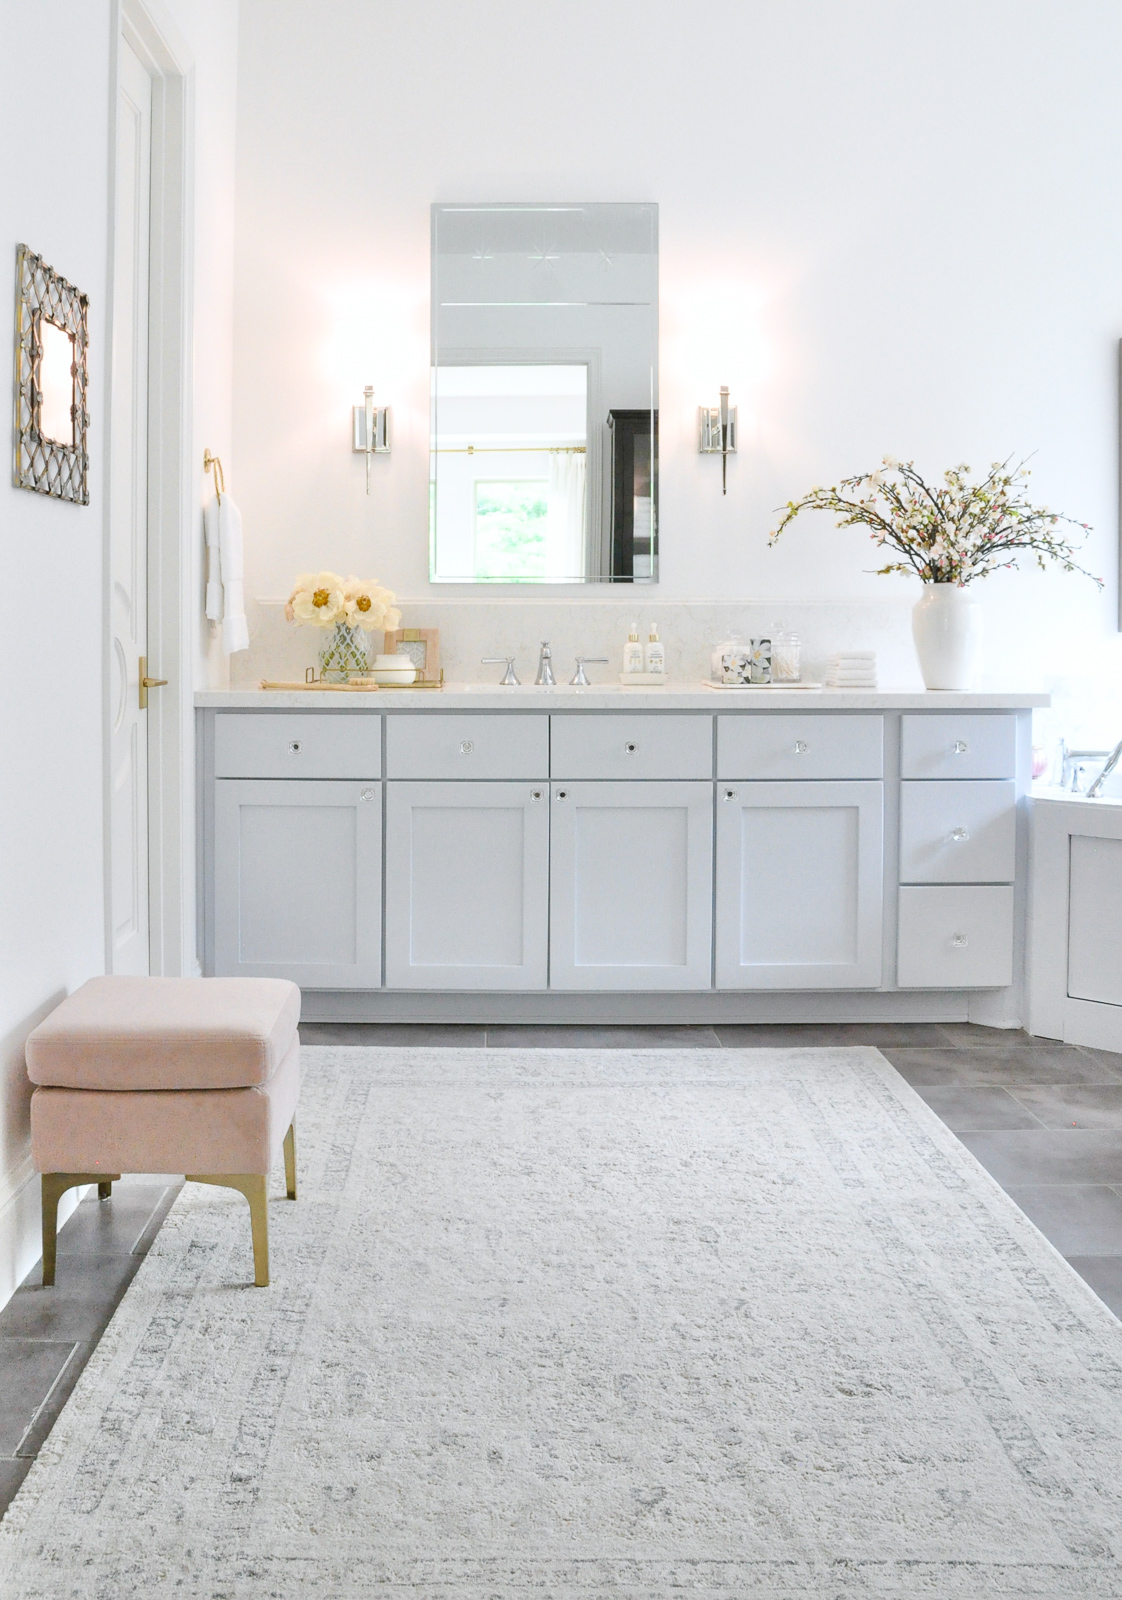 Master bathroom bright beautiful new look reveal shows every angle detail!